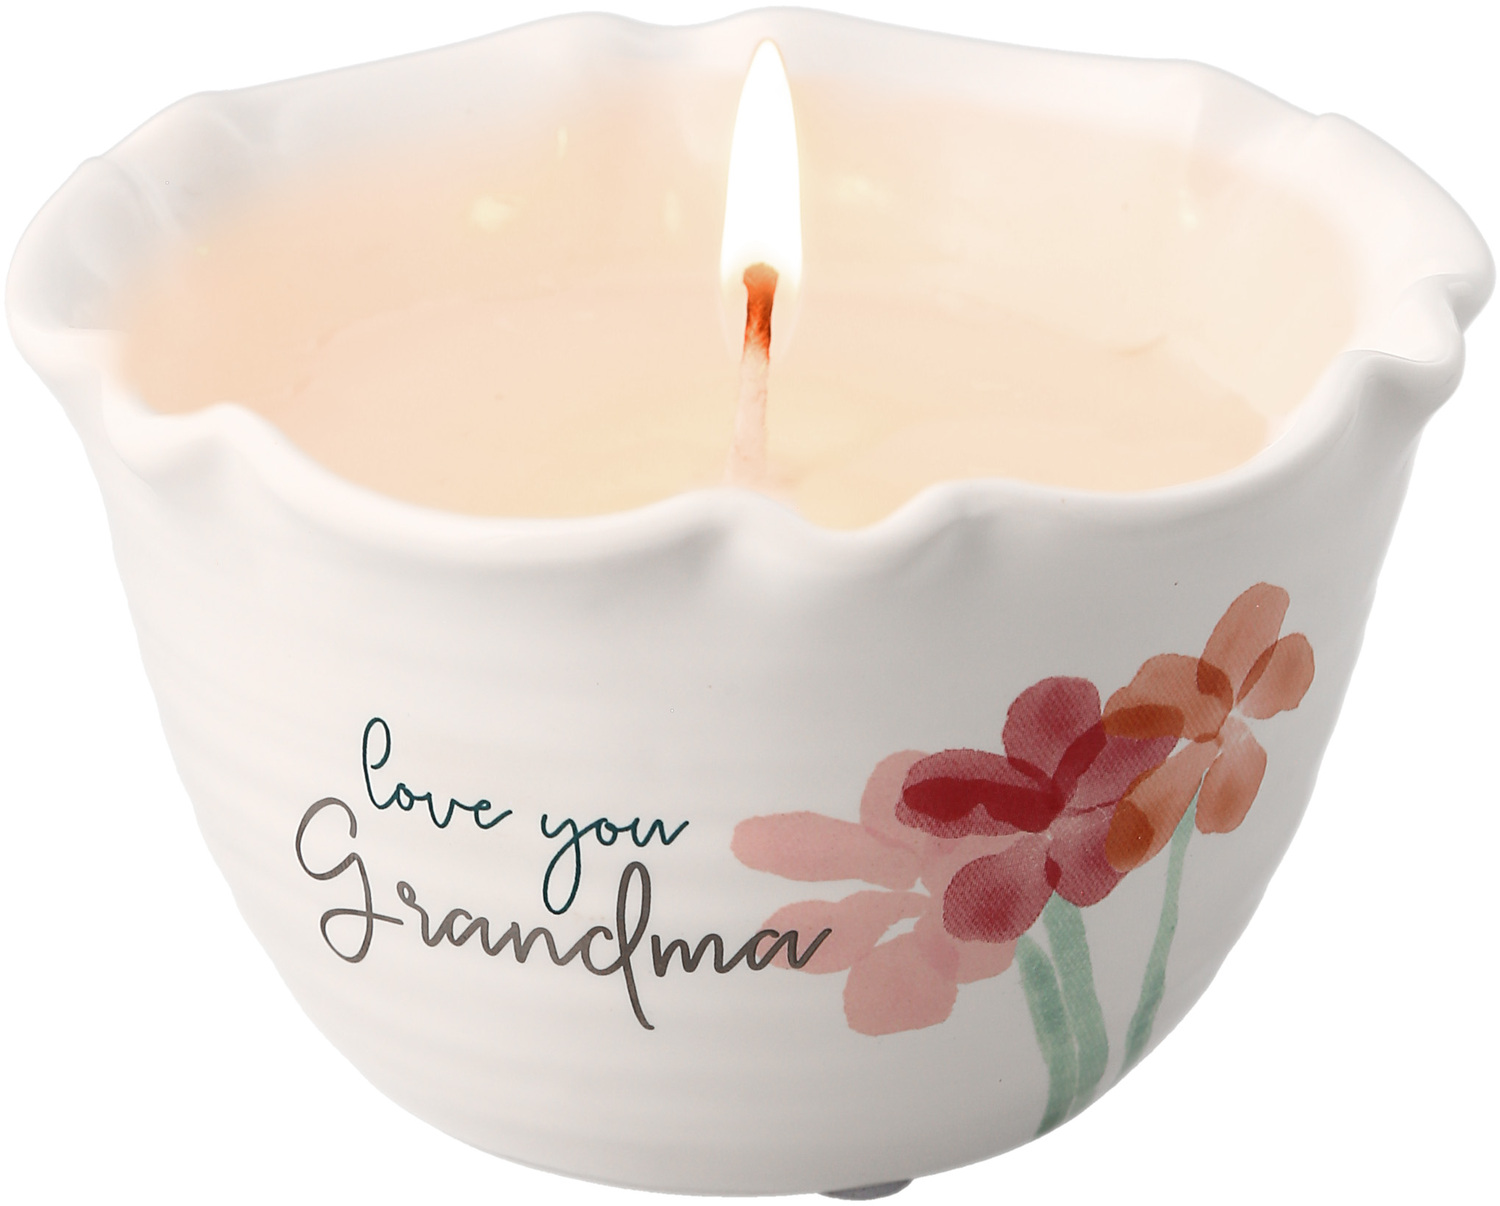 Grandma by Rosy Heart - Grandma - 9 oz - 100% Soy Wax Candle
Scent: Tranquility